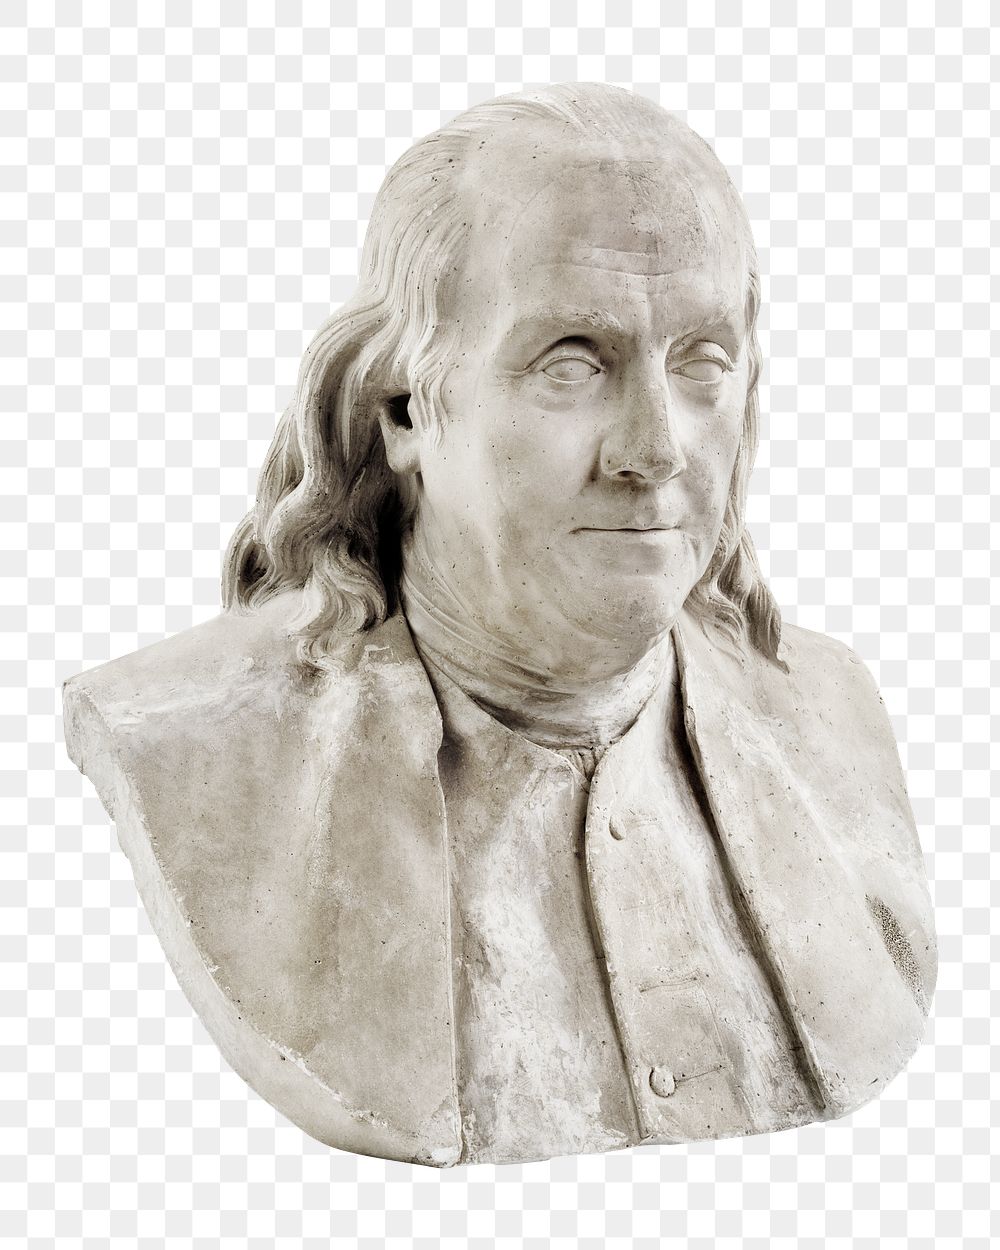 Benjamin Franklin png sculpture by Hiram Powers, transparent background. Remixed by rawpixel.